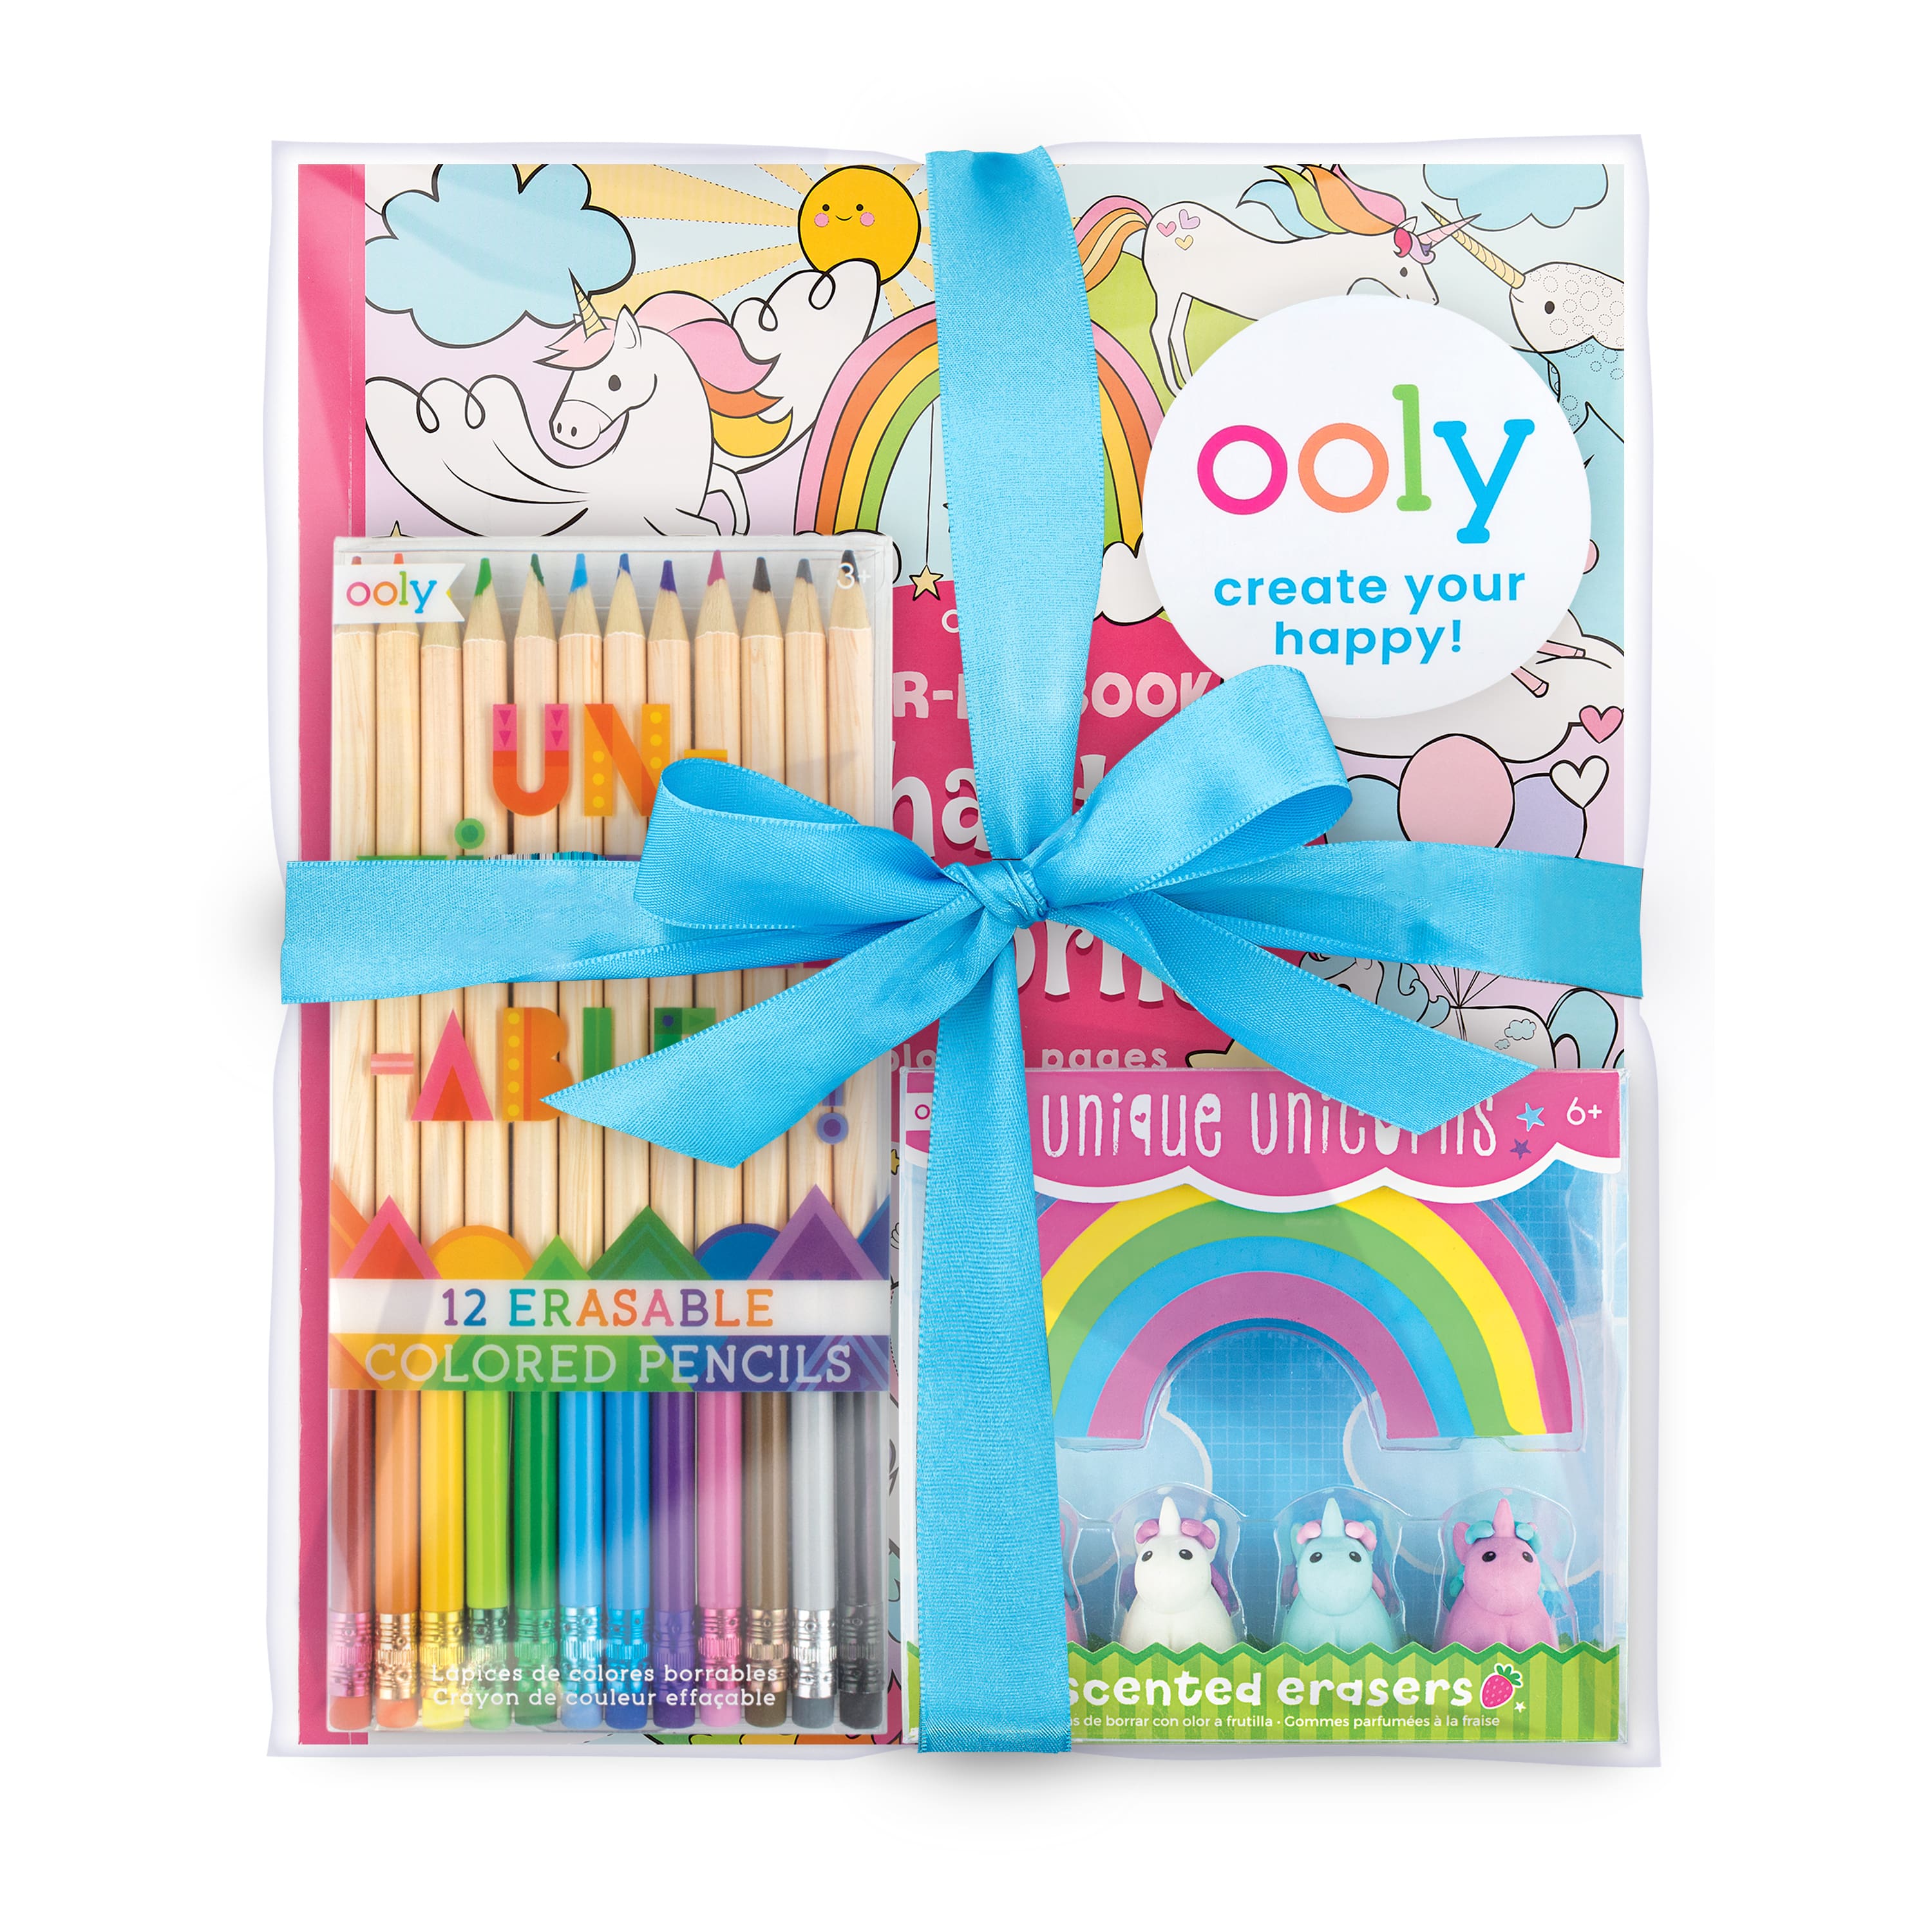 Fun & Colorful Coloring Sets